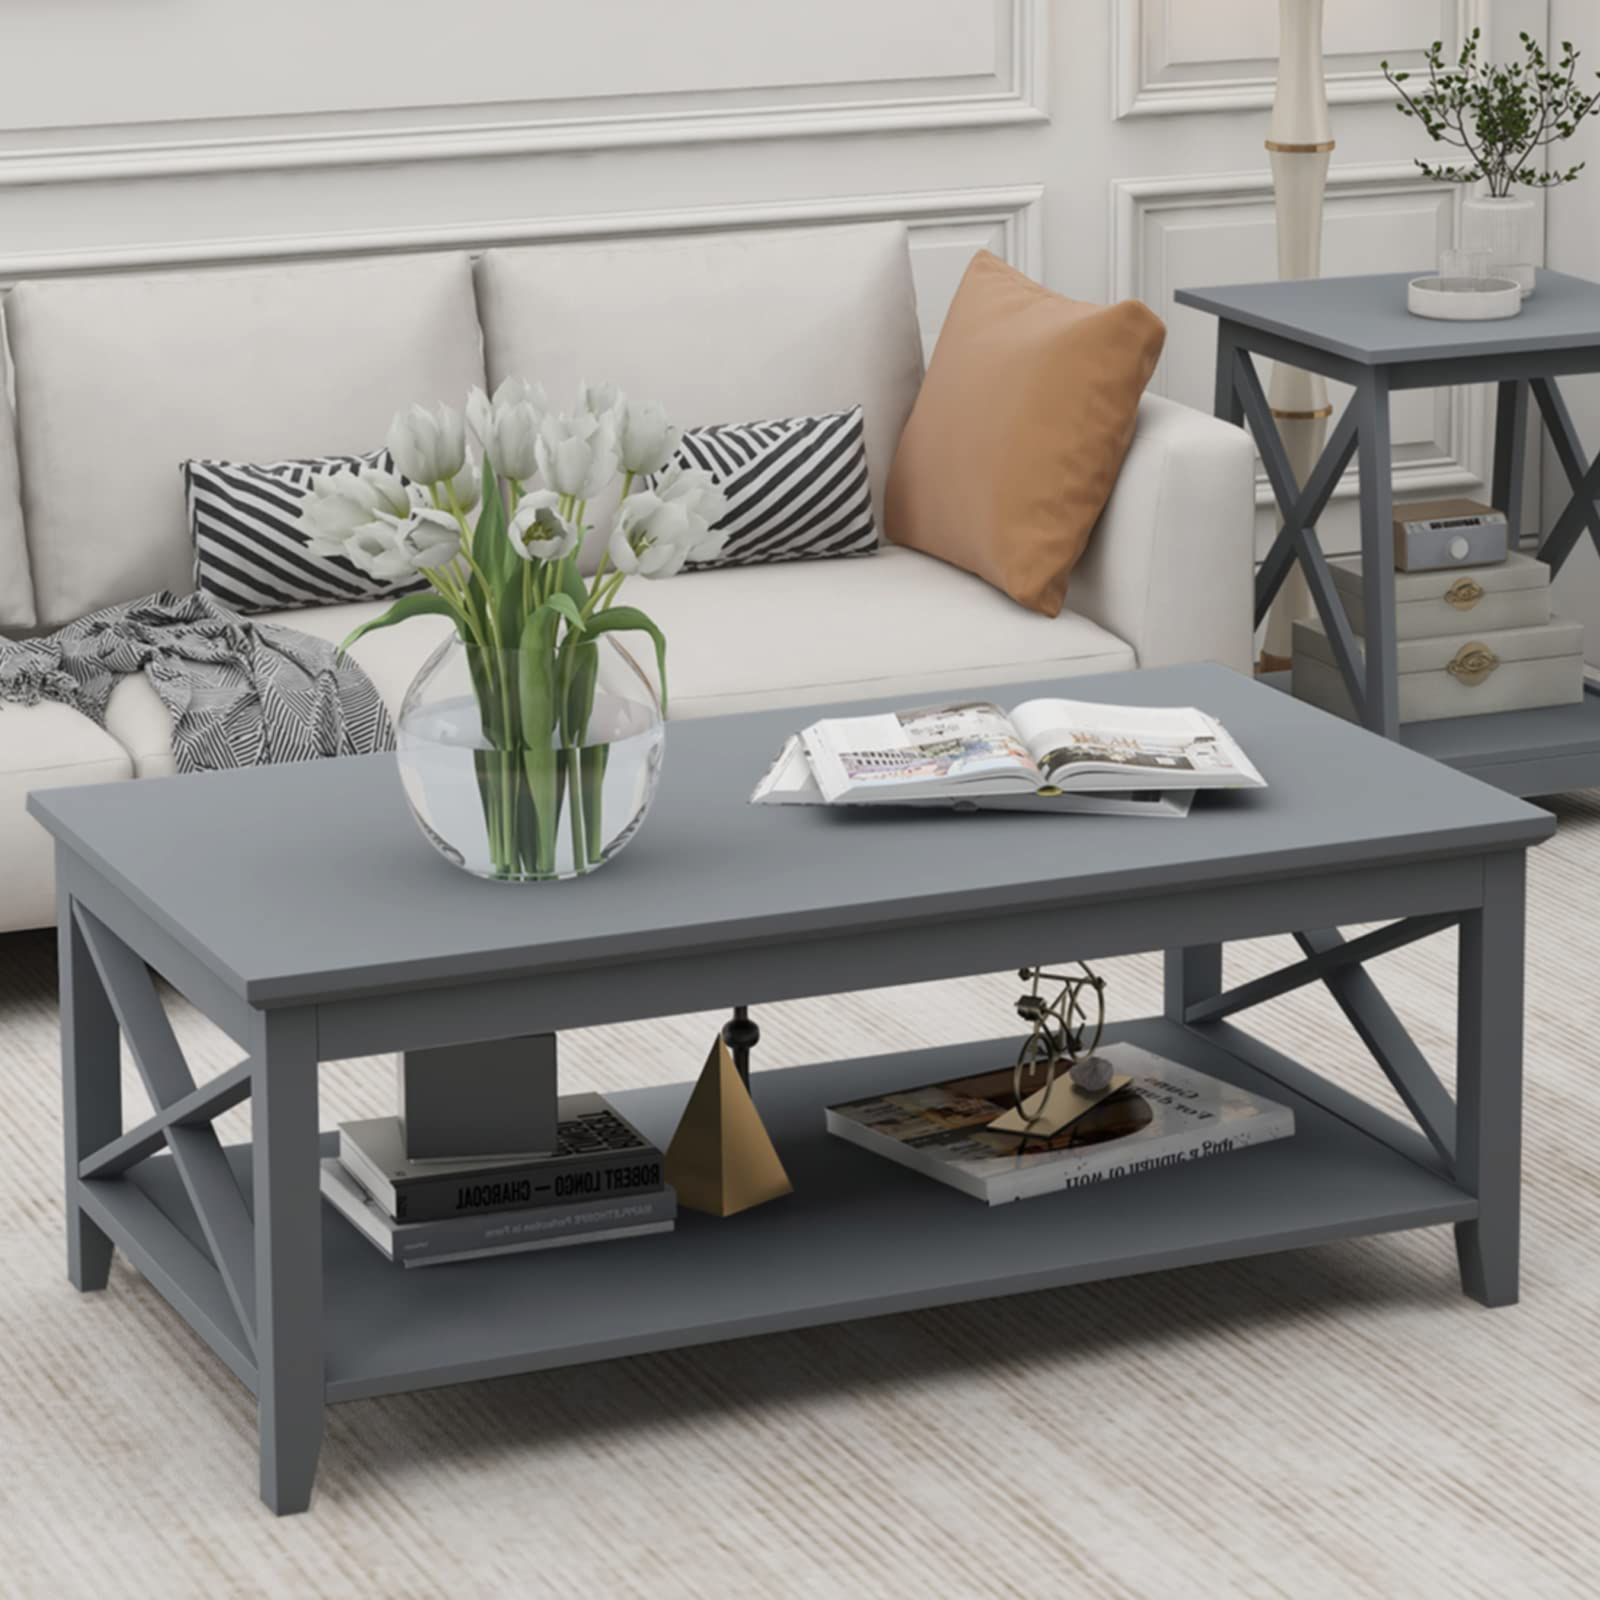 Best And Newest Amazon: Choochoo Coffee Table Classic X Design For Living Room,  Rectangular Modern Cocktail Table With Storage Shelf, 39 Inch (grey) : Home  & Kitchen In Modern Wooden X Design Coffee Tables (View 5 of 10)